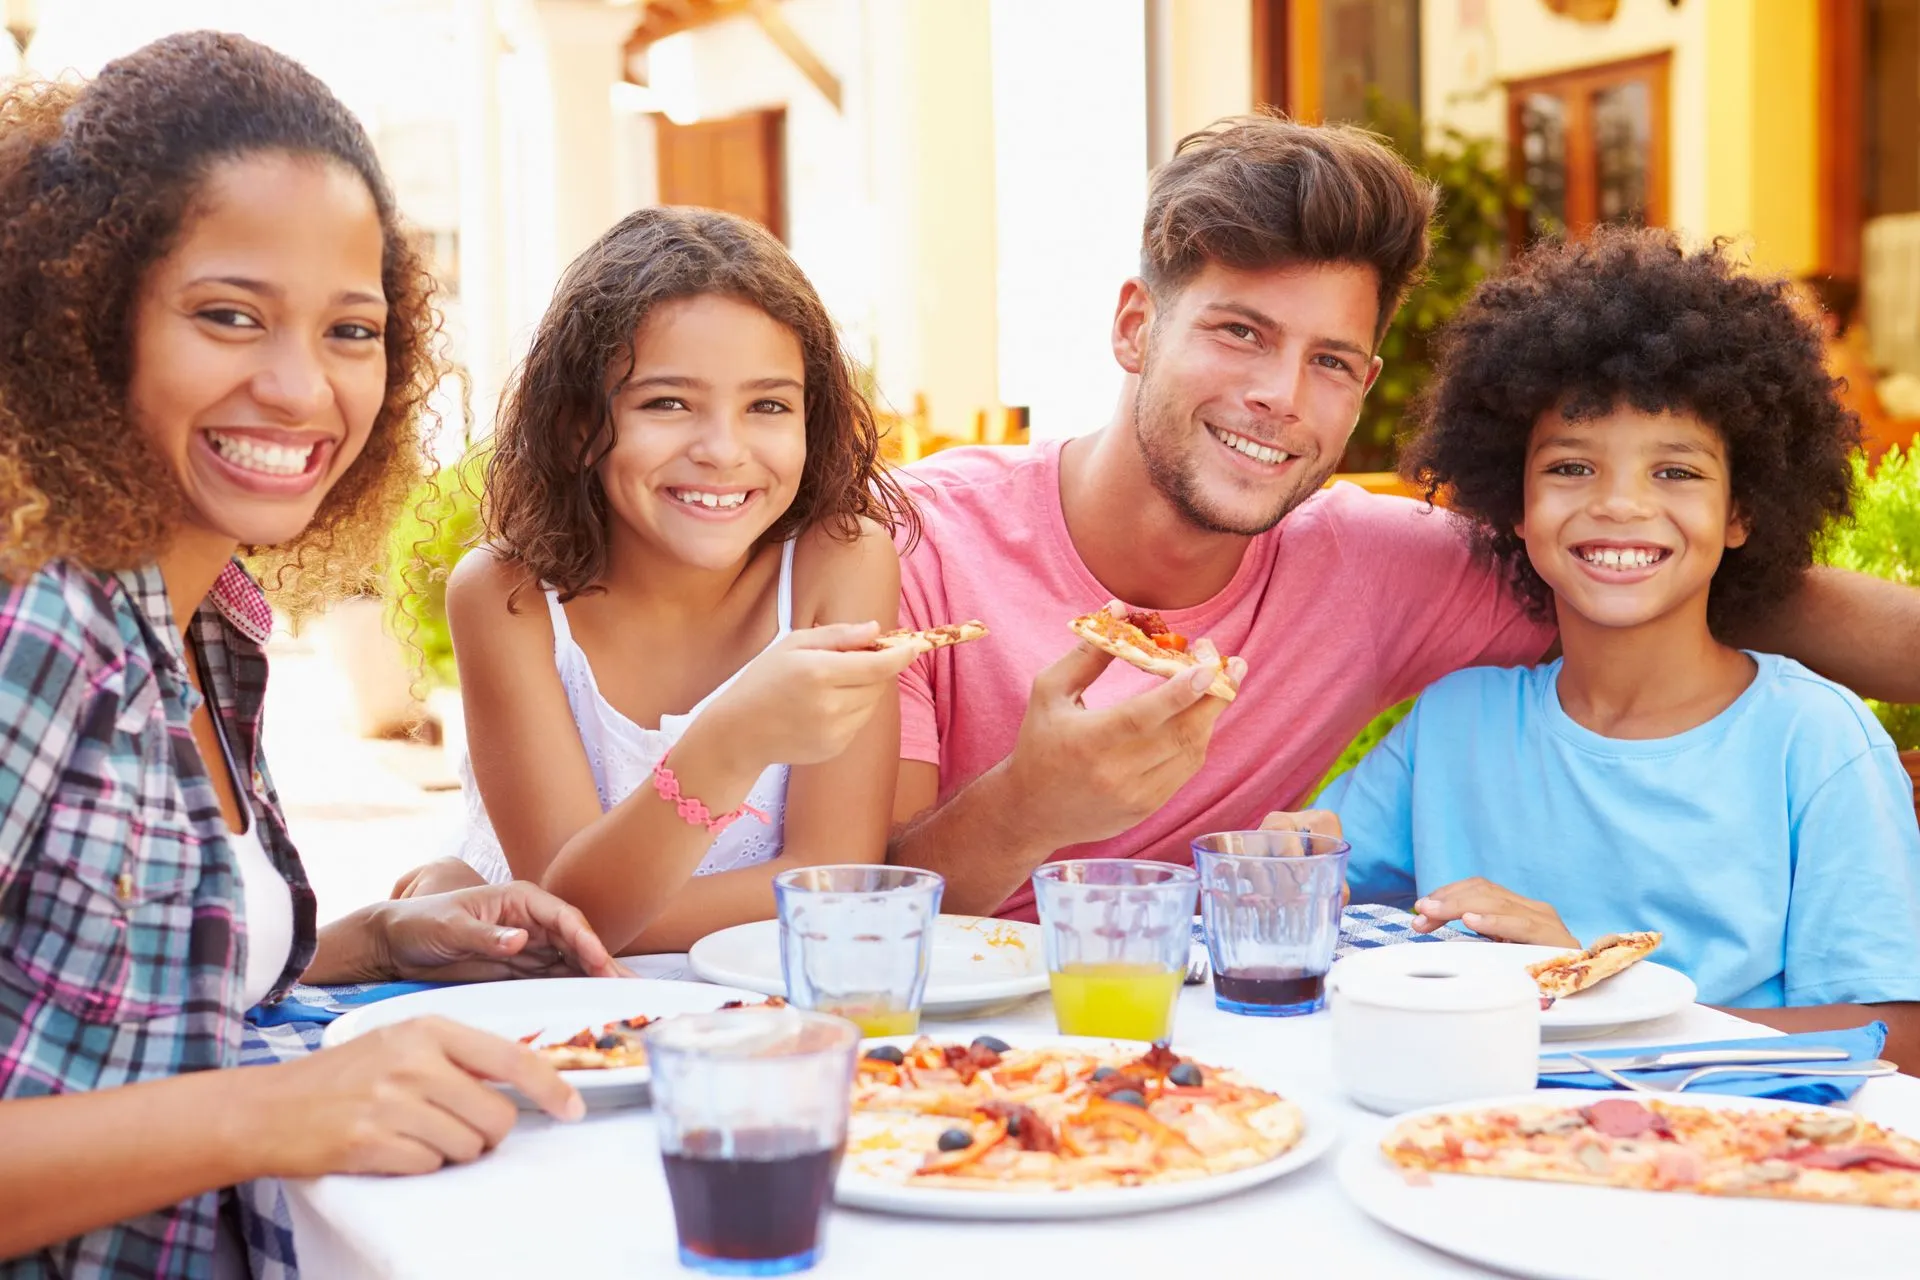 Popular Pizza Toppings to Consider for Family Night